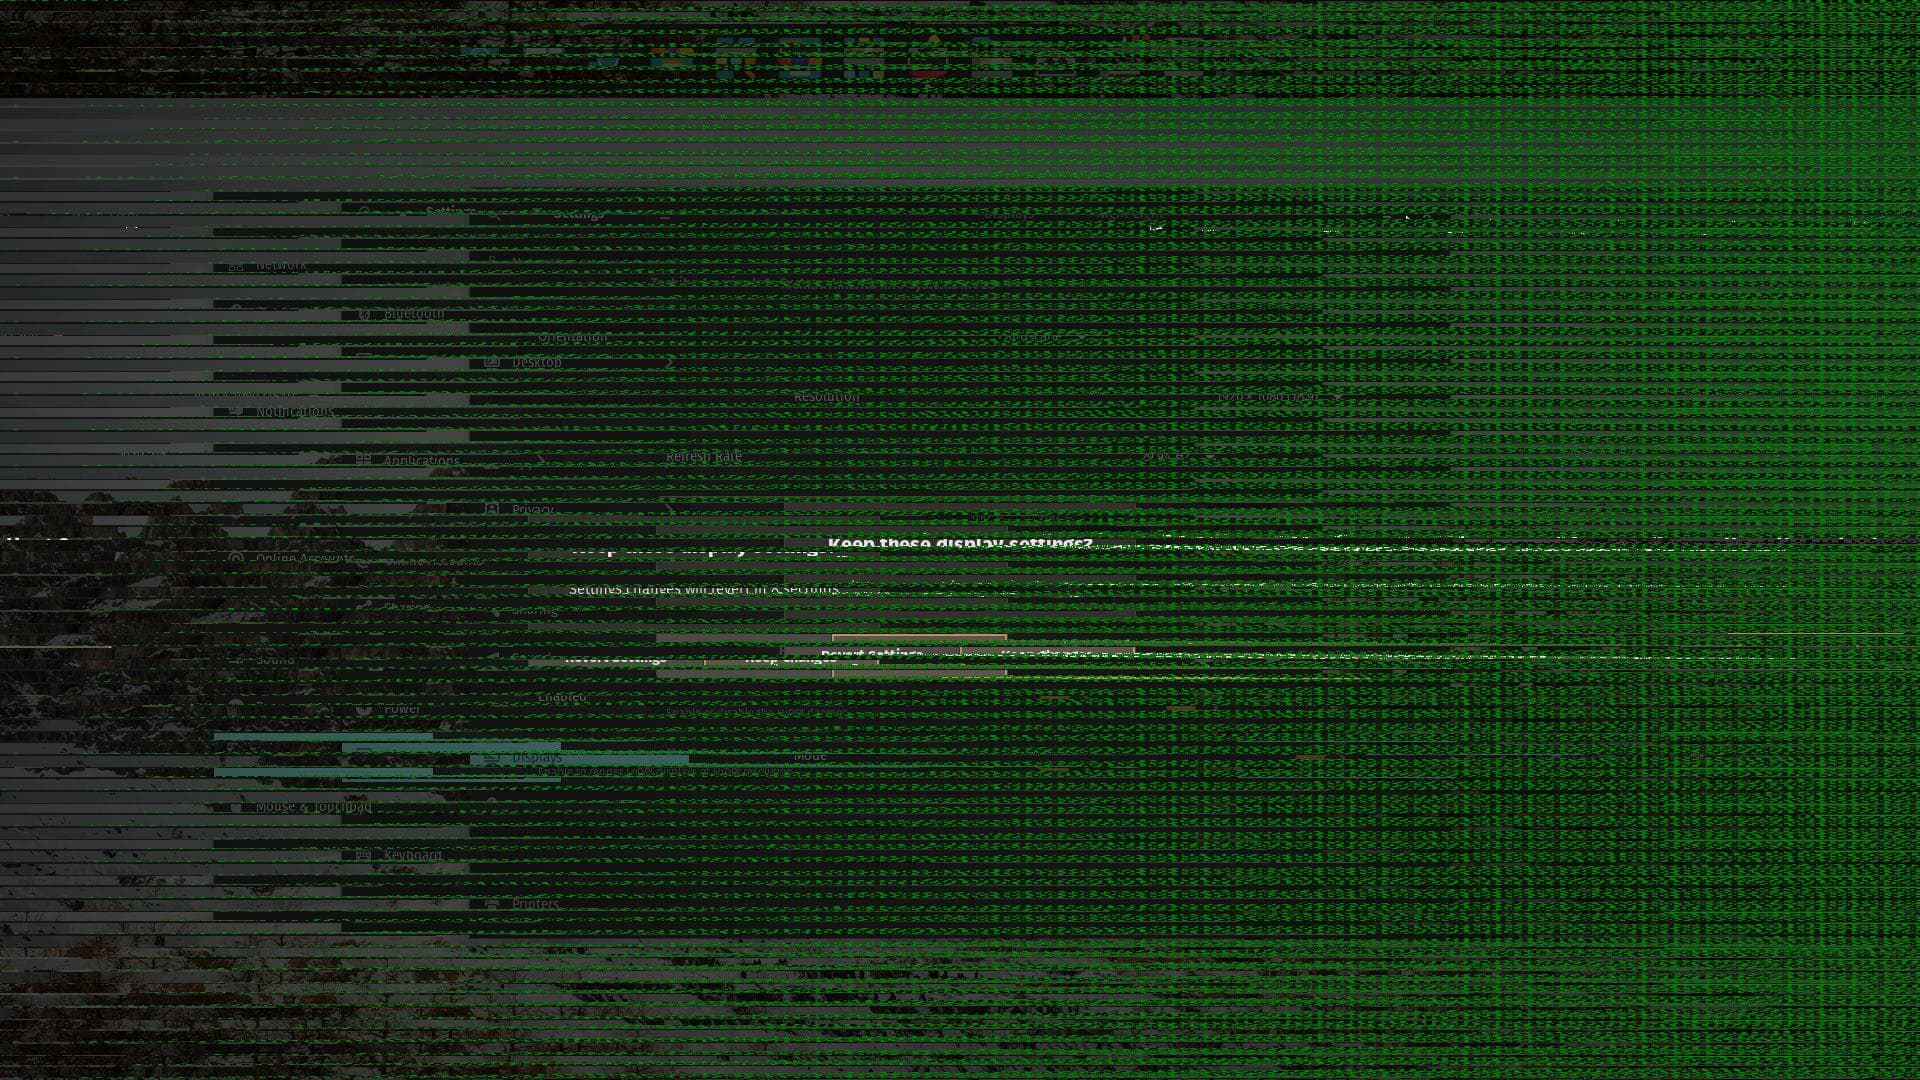 Green lines and flickering are present throughout the image. Elements on the desktop are disjointed and illegible.